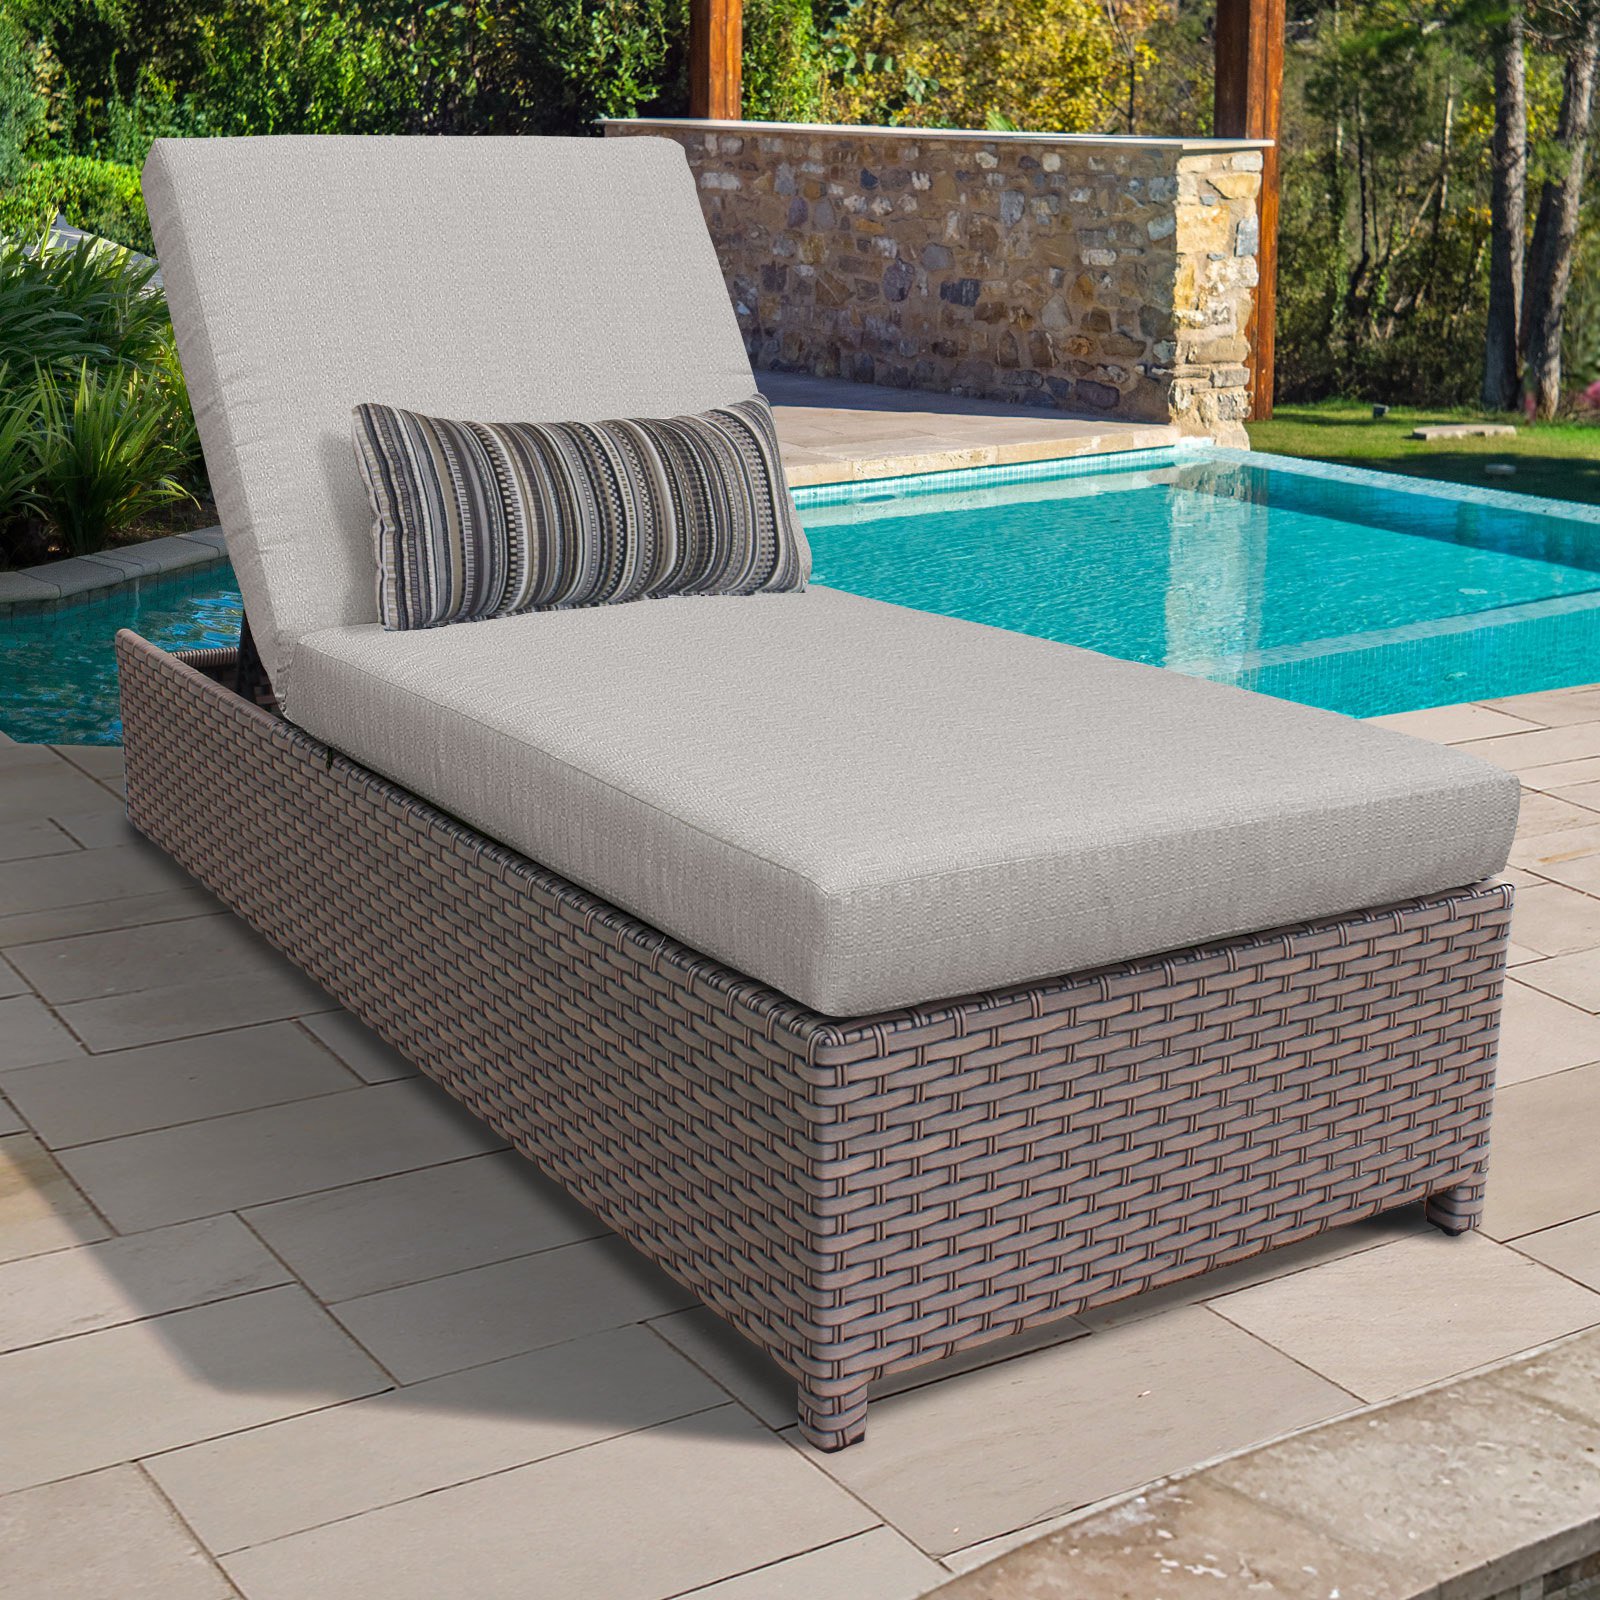 TK Classics Monterey Wheeled Wicker Outdoor Chaise Lounge Chair - image 3 of 11